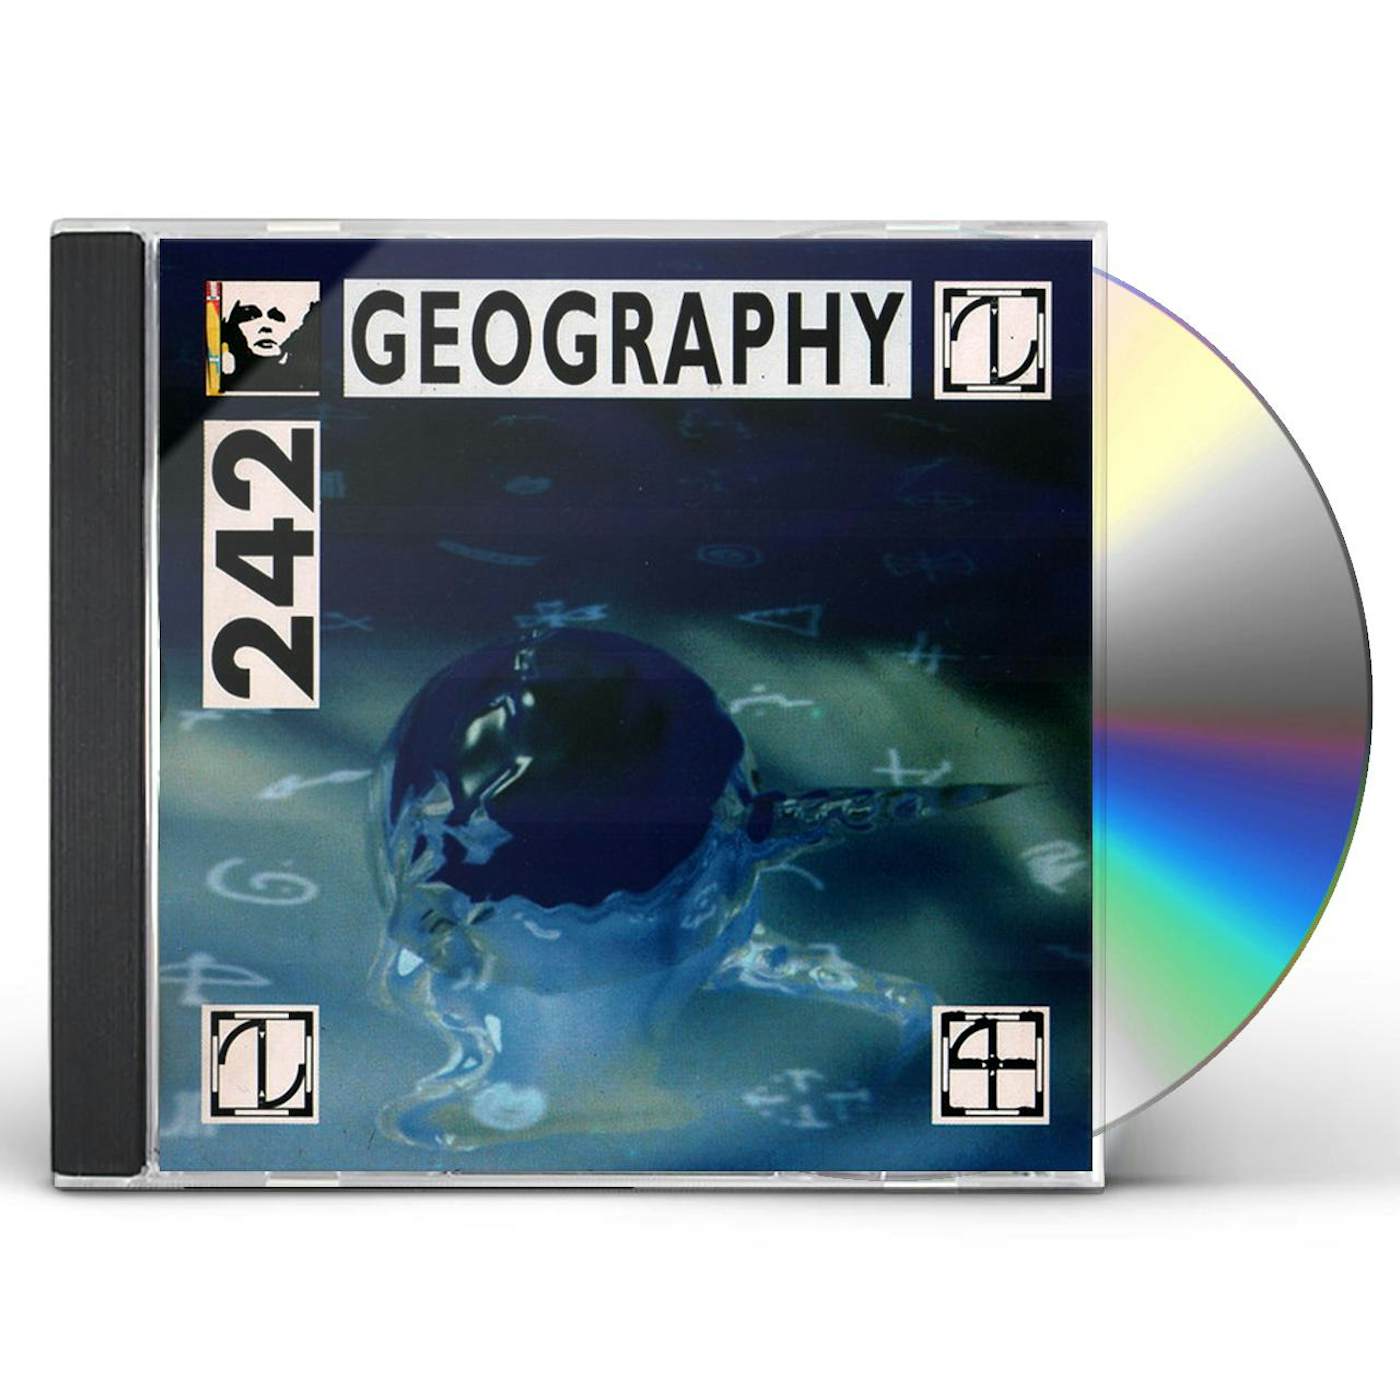 Front 242 GEOGRAPHY CD